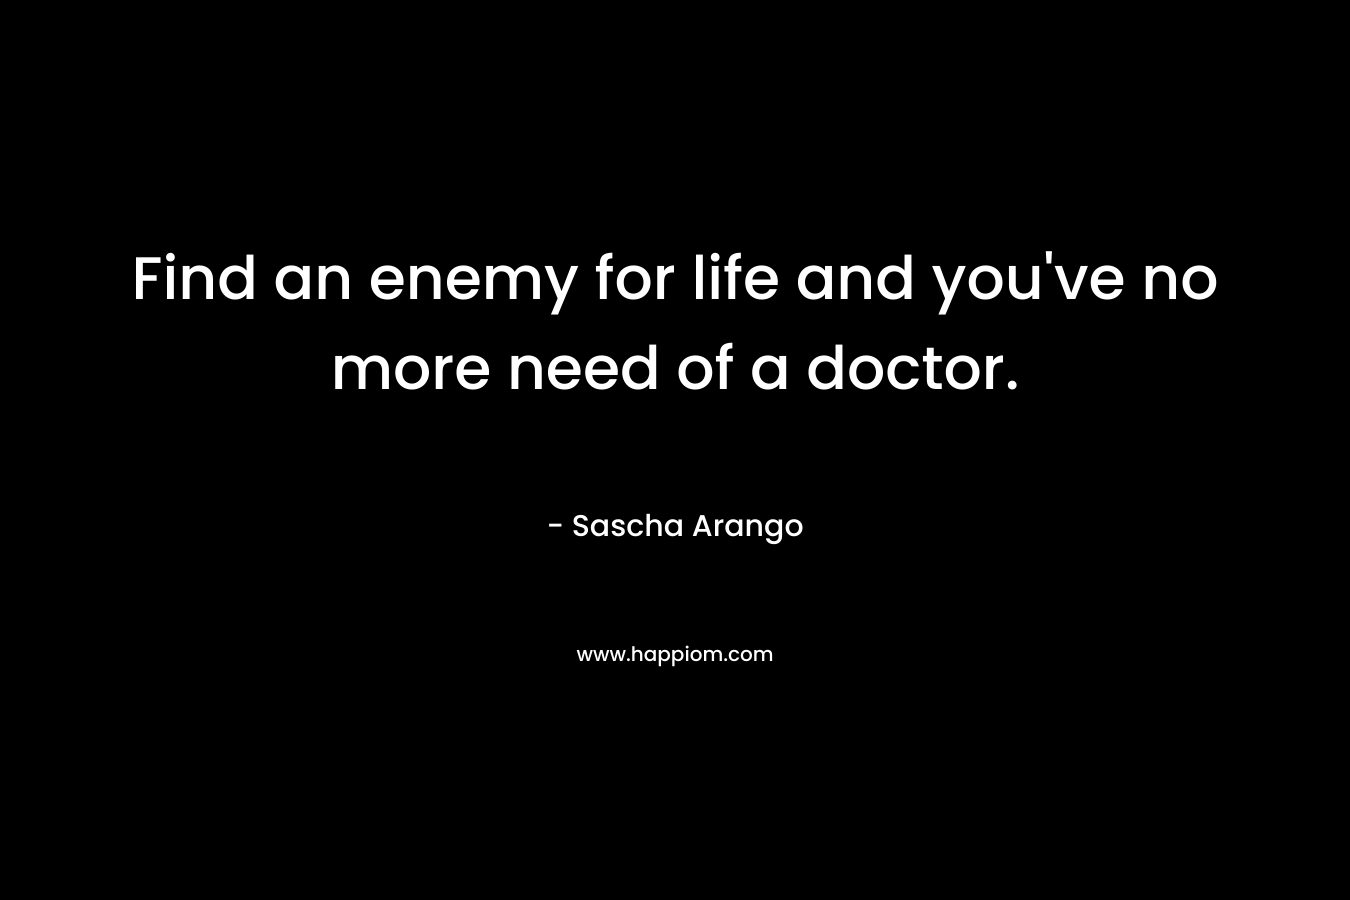 Find an enemy for life and you’ve no more need of a doctor. – Sascha Arango